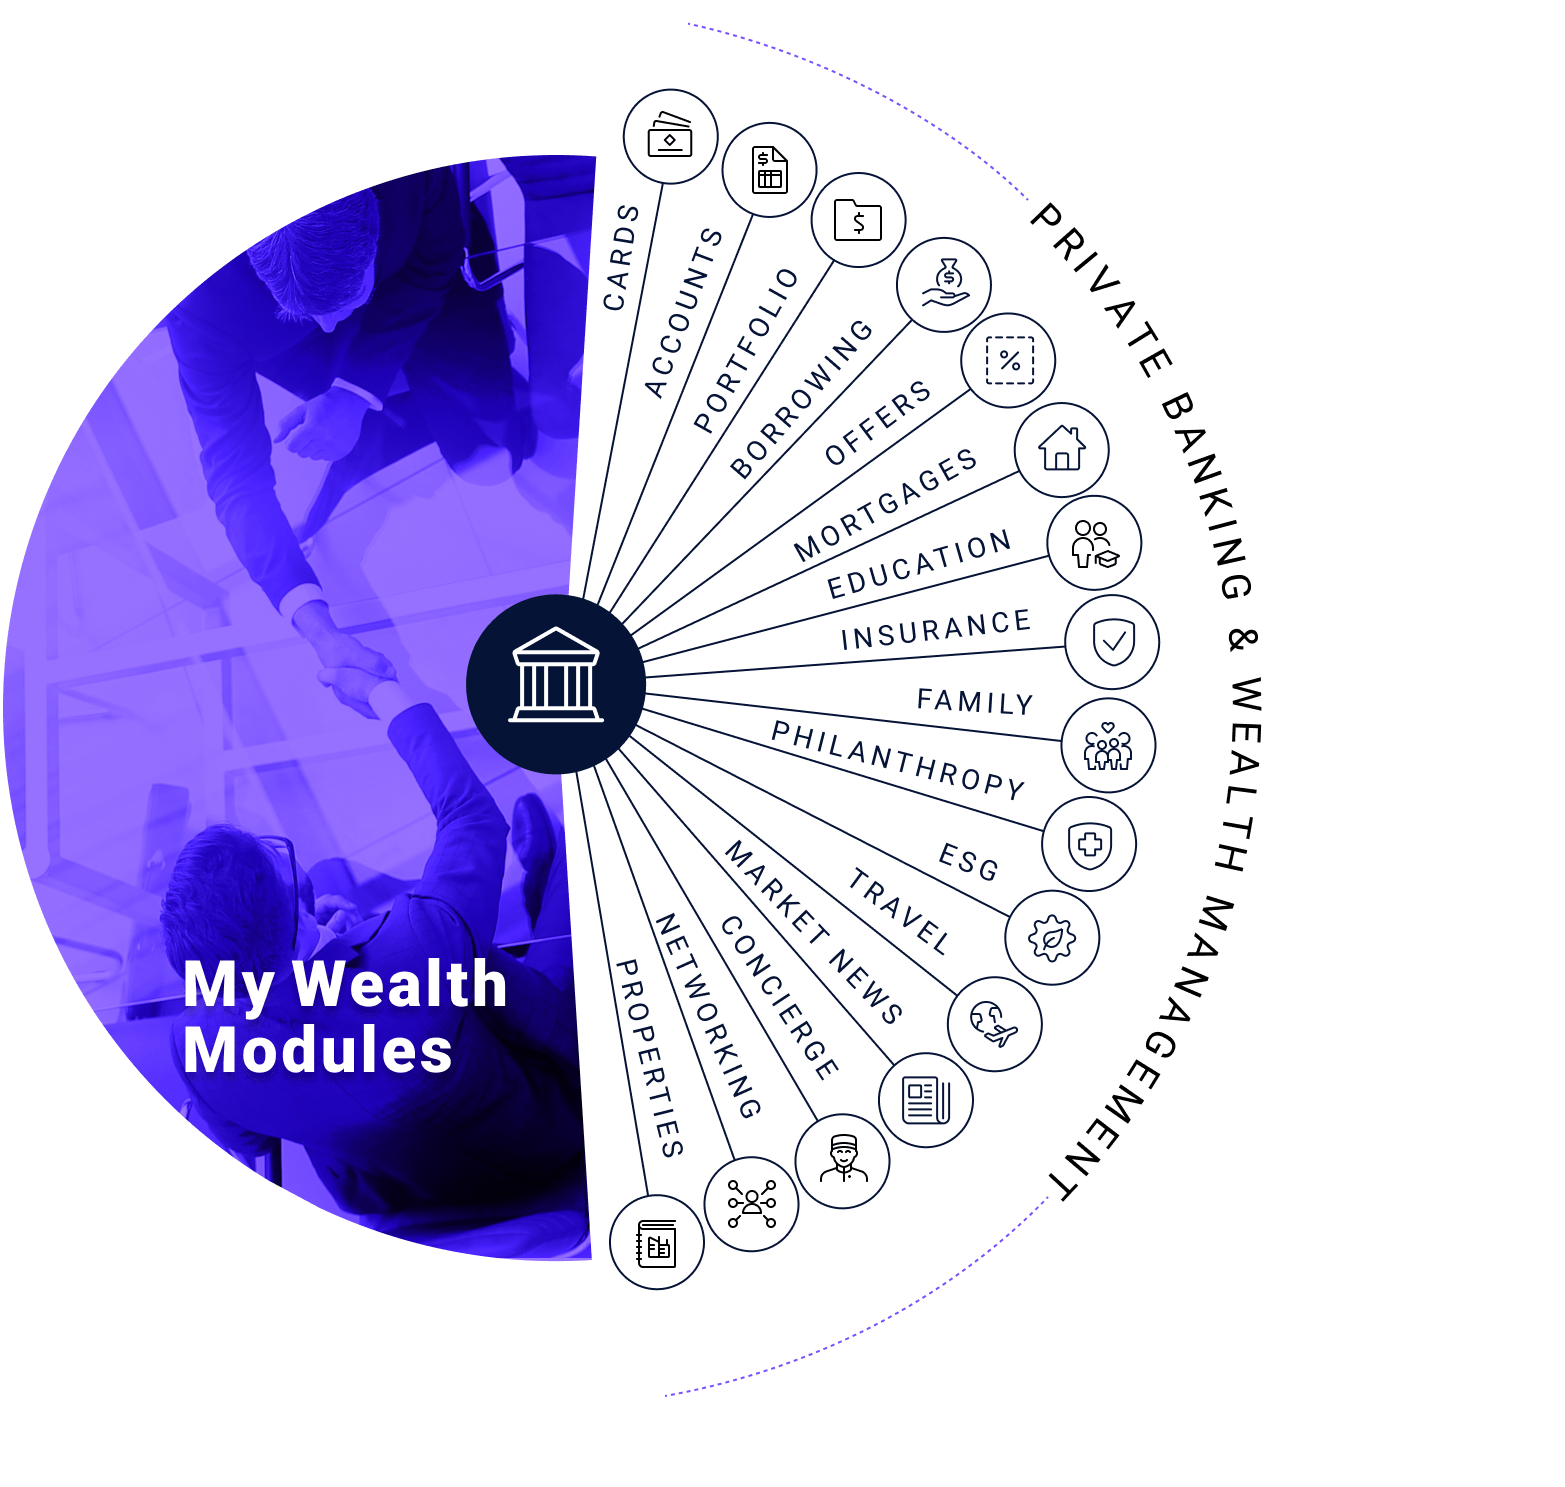 My Wealth Modules: cards, accounts, portfolio, borrowing, offers, mortgages, education, insurance, family, philanthropy, esg, travel, market news, concierge, networking, and properties